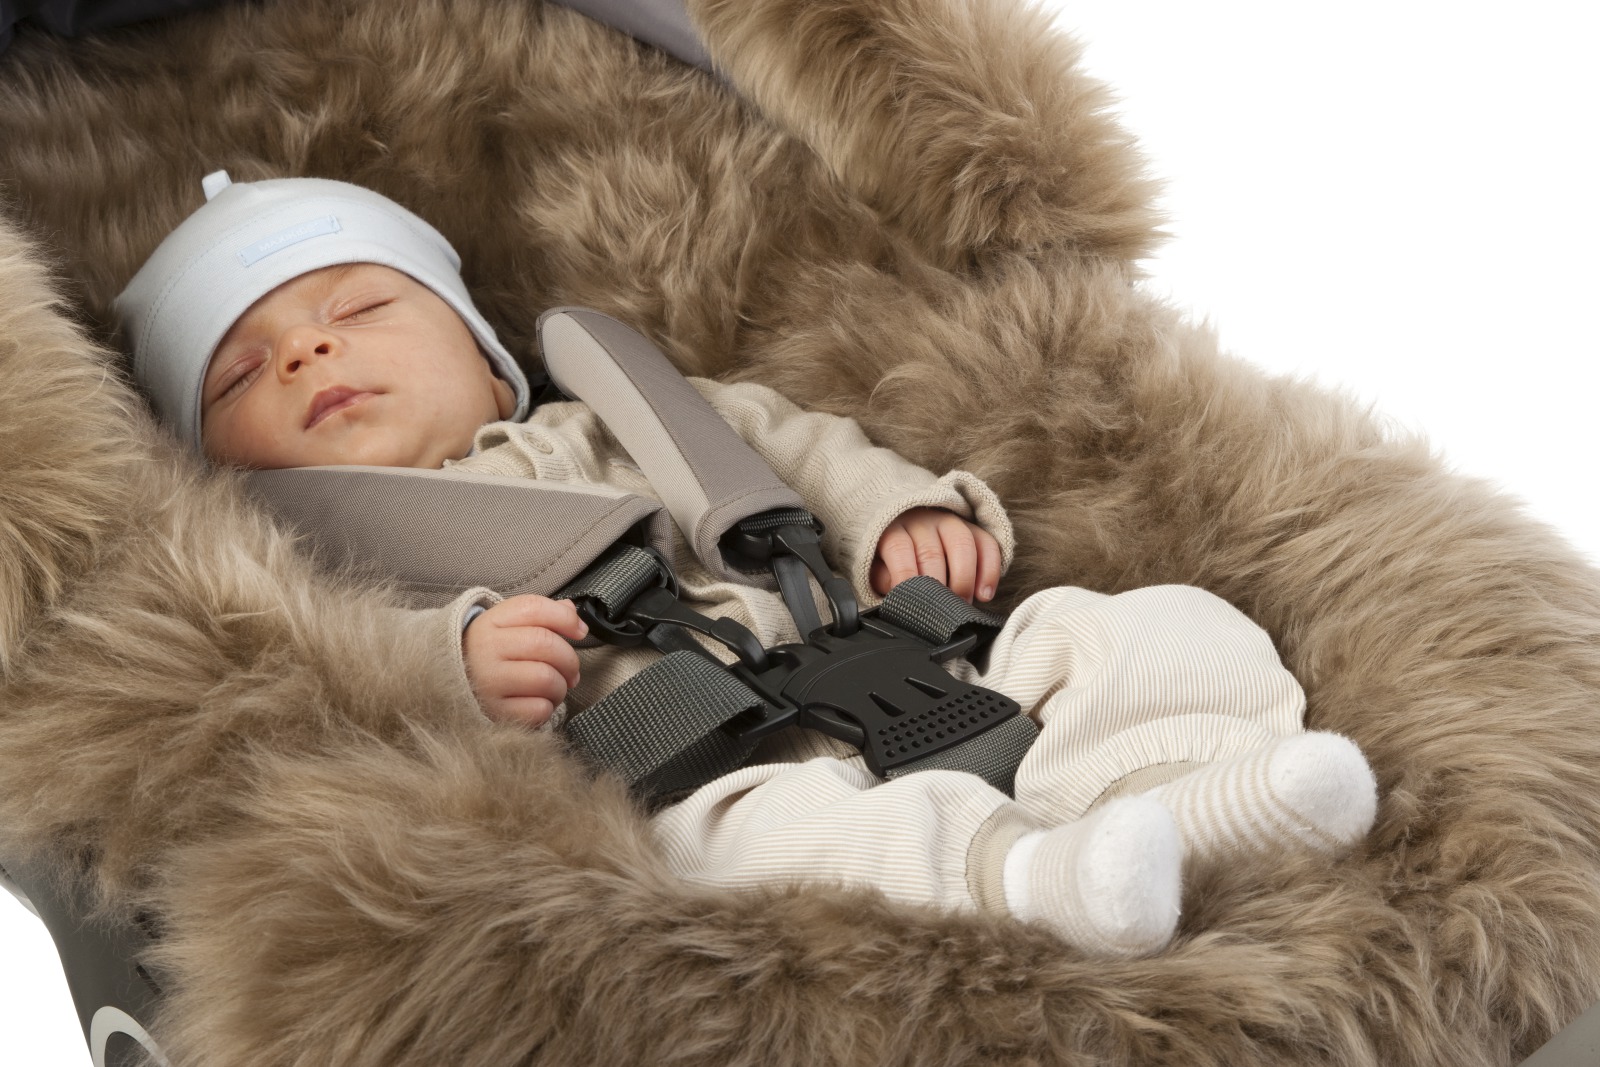 stroller accessories for winter